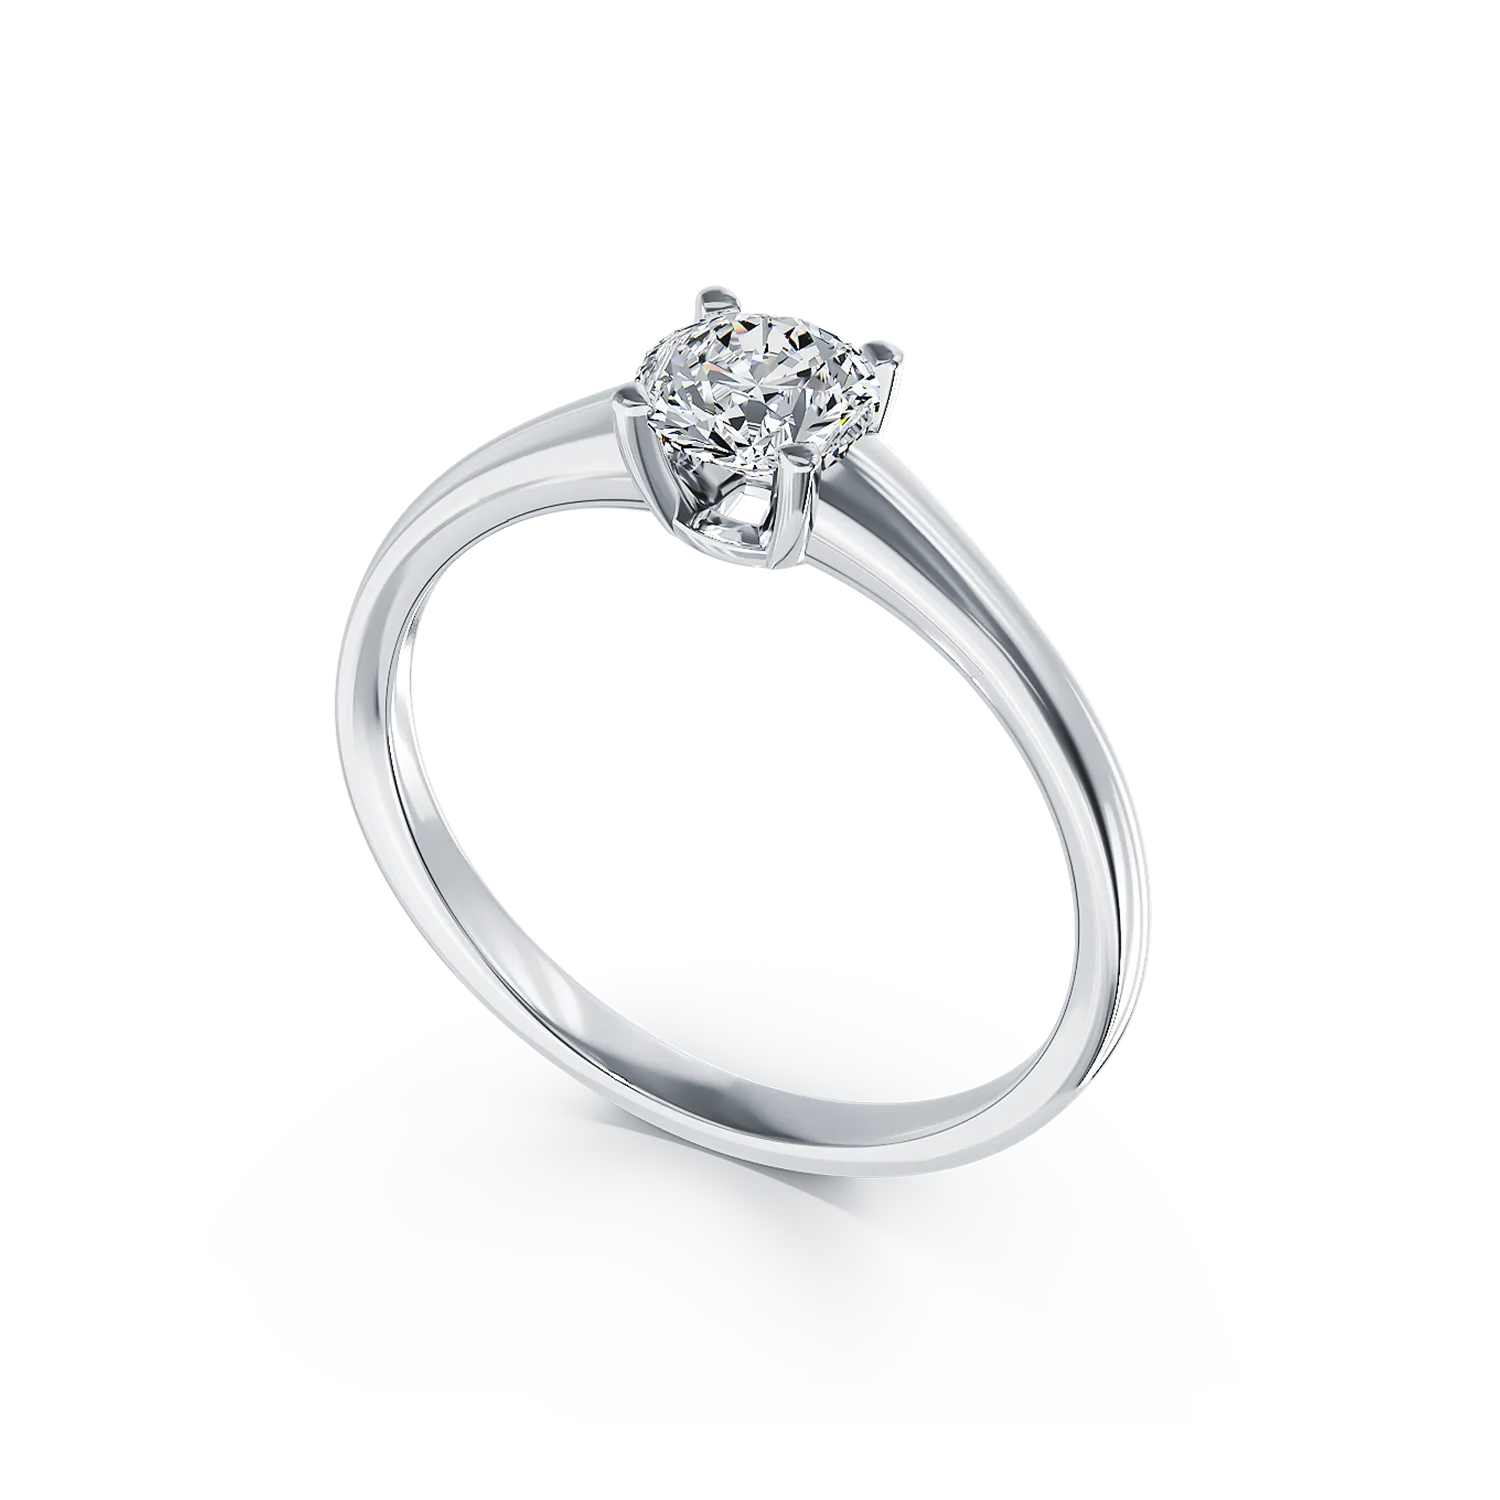 18K white gold engagement ring with 0.5ct diamond